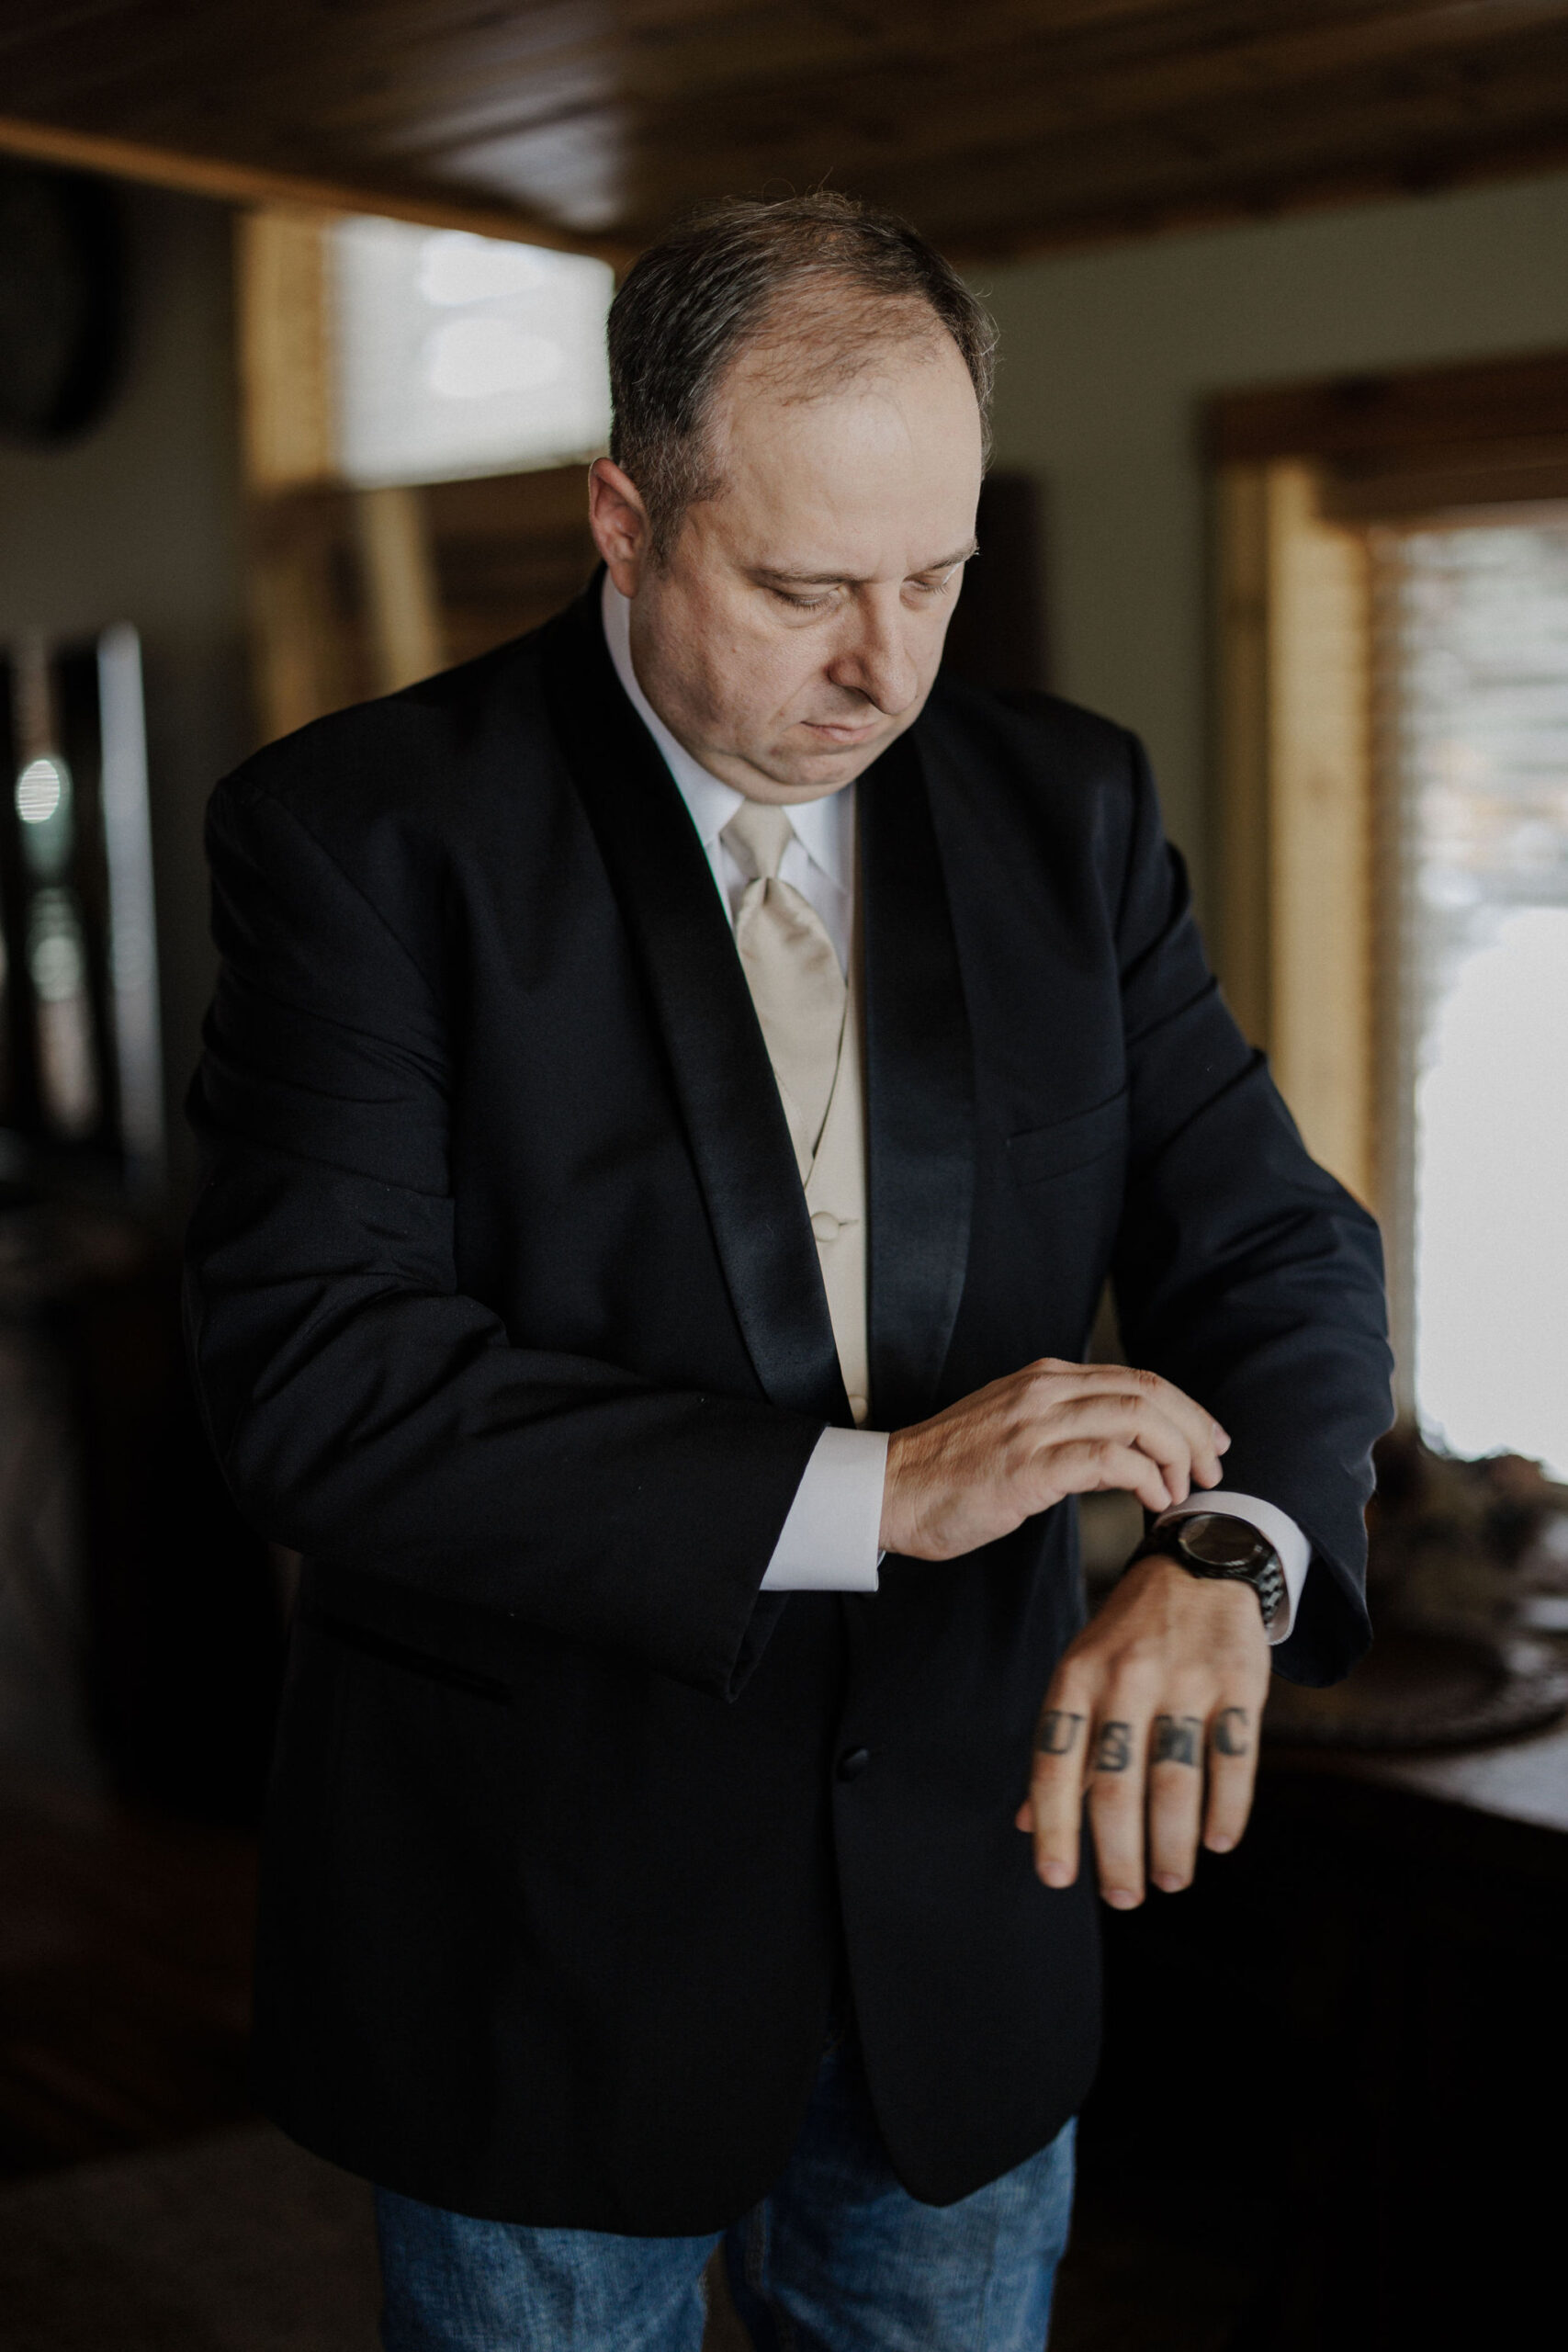 groom gets ready for wedding and puts jacket on